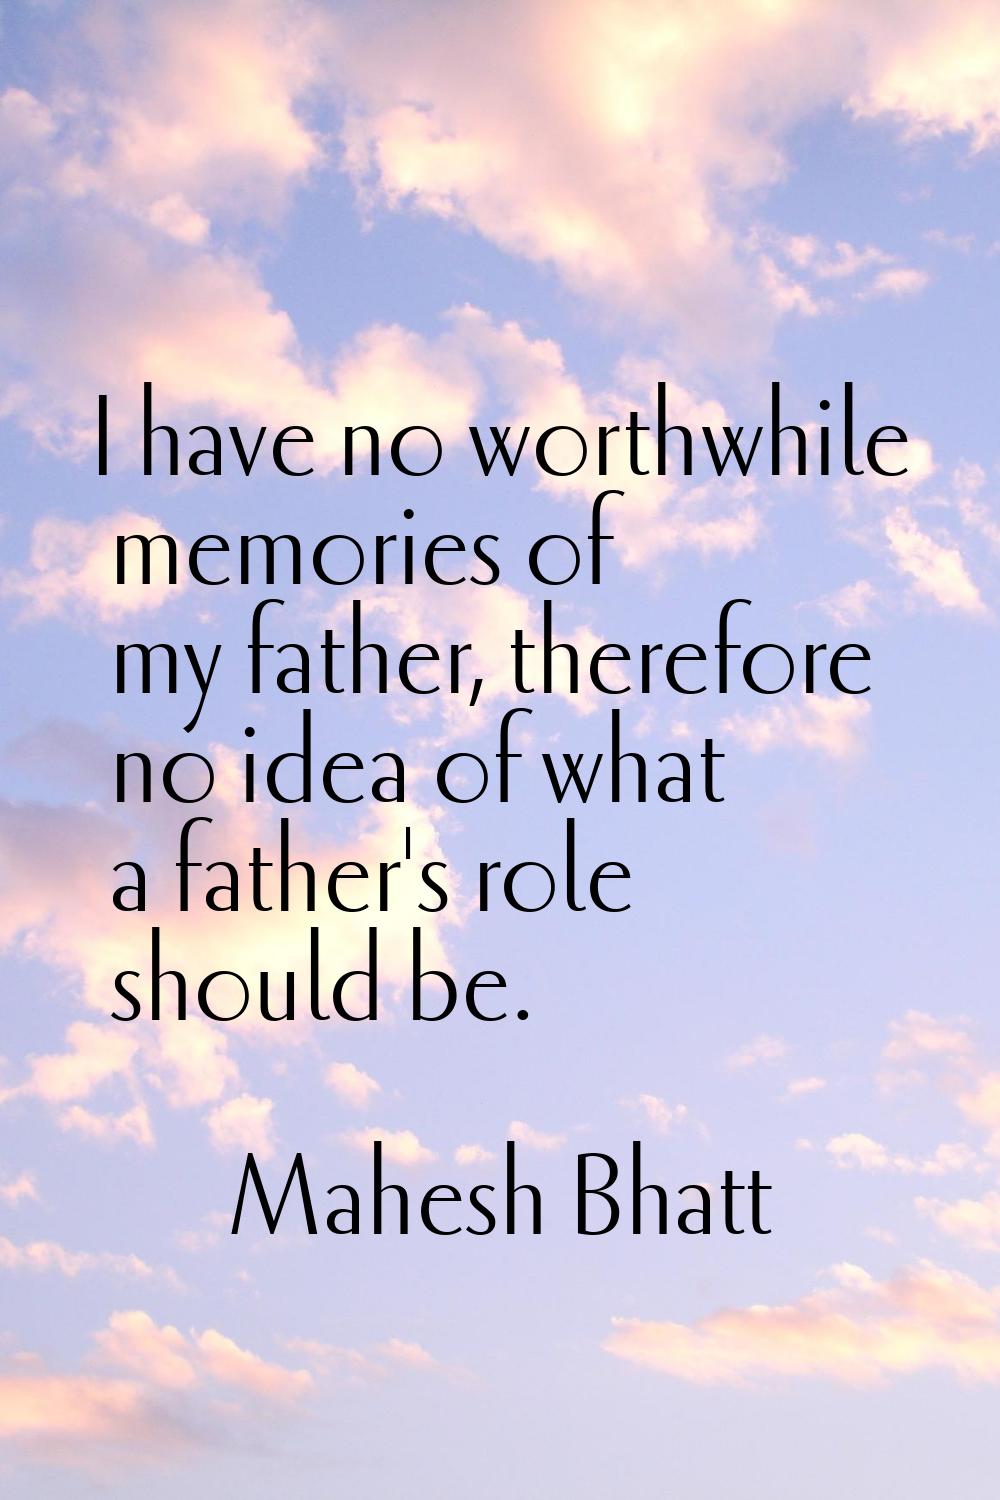 I have no worthwhile memories of my father, therefore no idea of what a father's role should be.